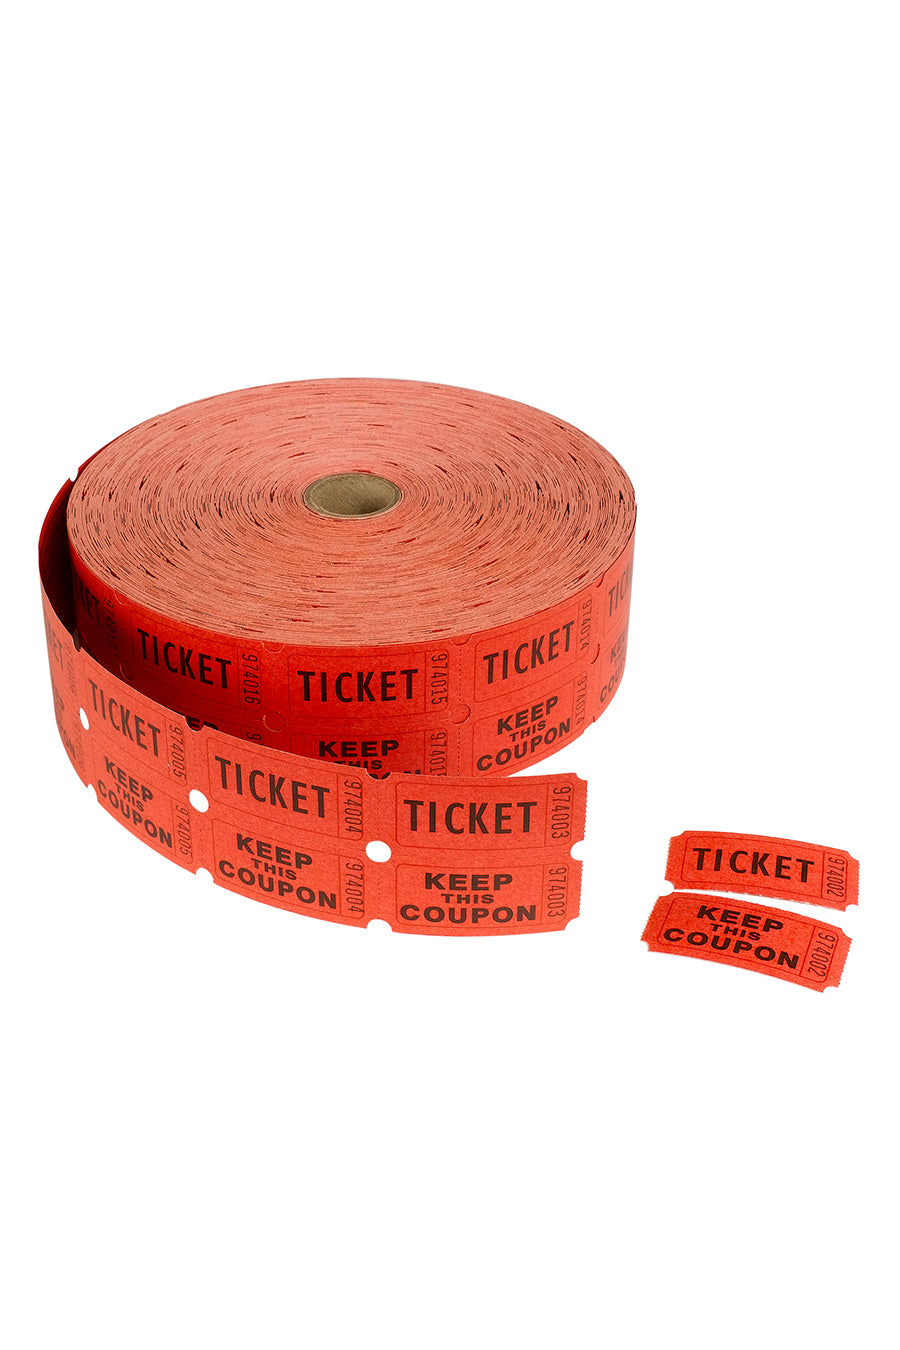 Double Ticket Roll, "Ticket/Keep This Coupon", Red, 2000 Tickets/Roll